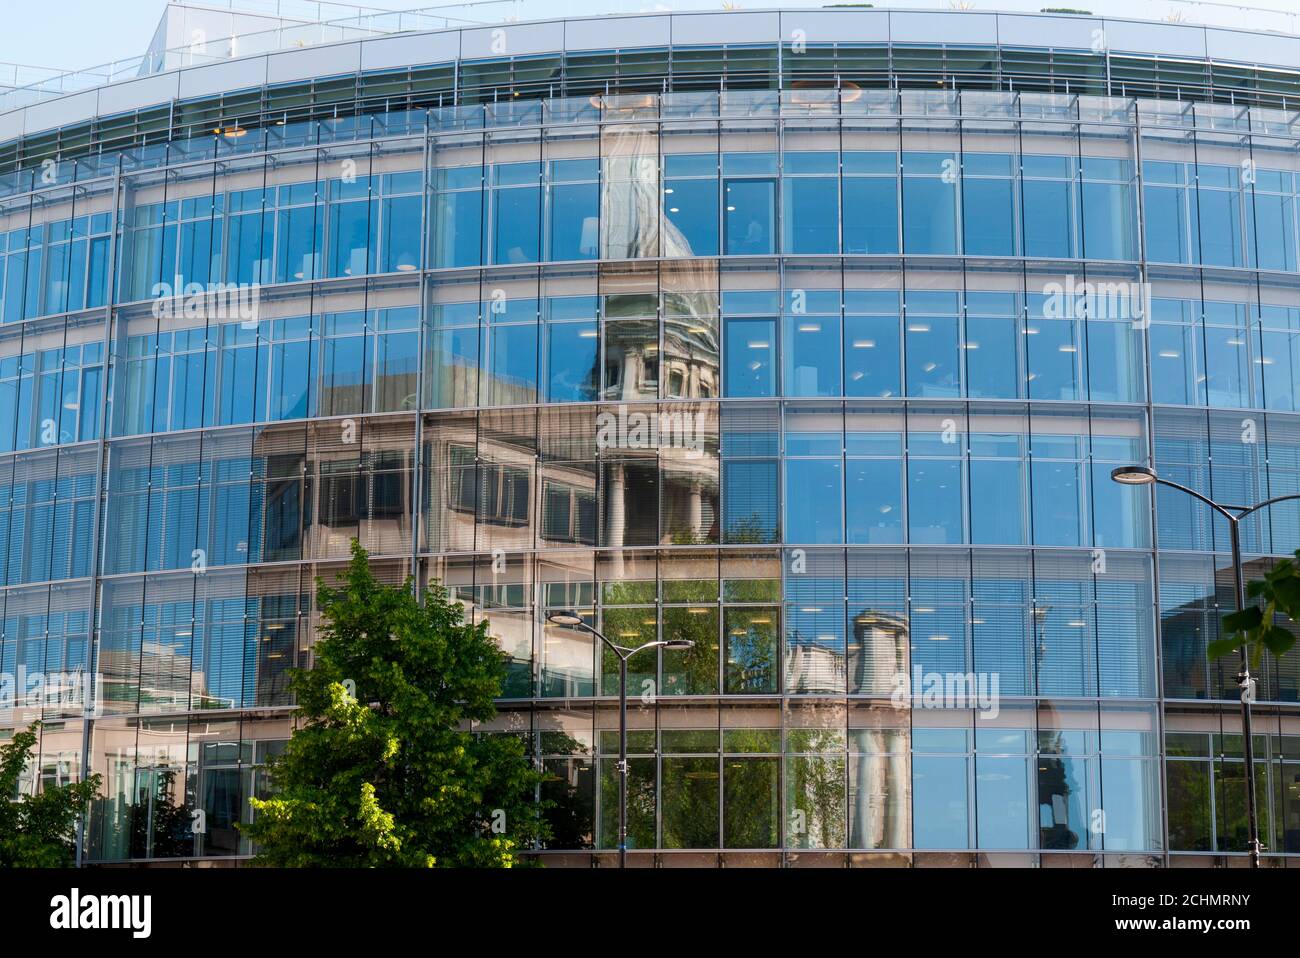 The facade of St Paul's Cathedral, London is captured fragmented in the mirrored glass of a nearby building Stock Photo